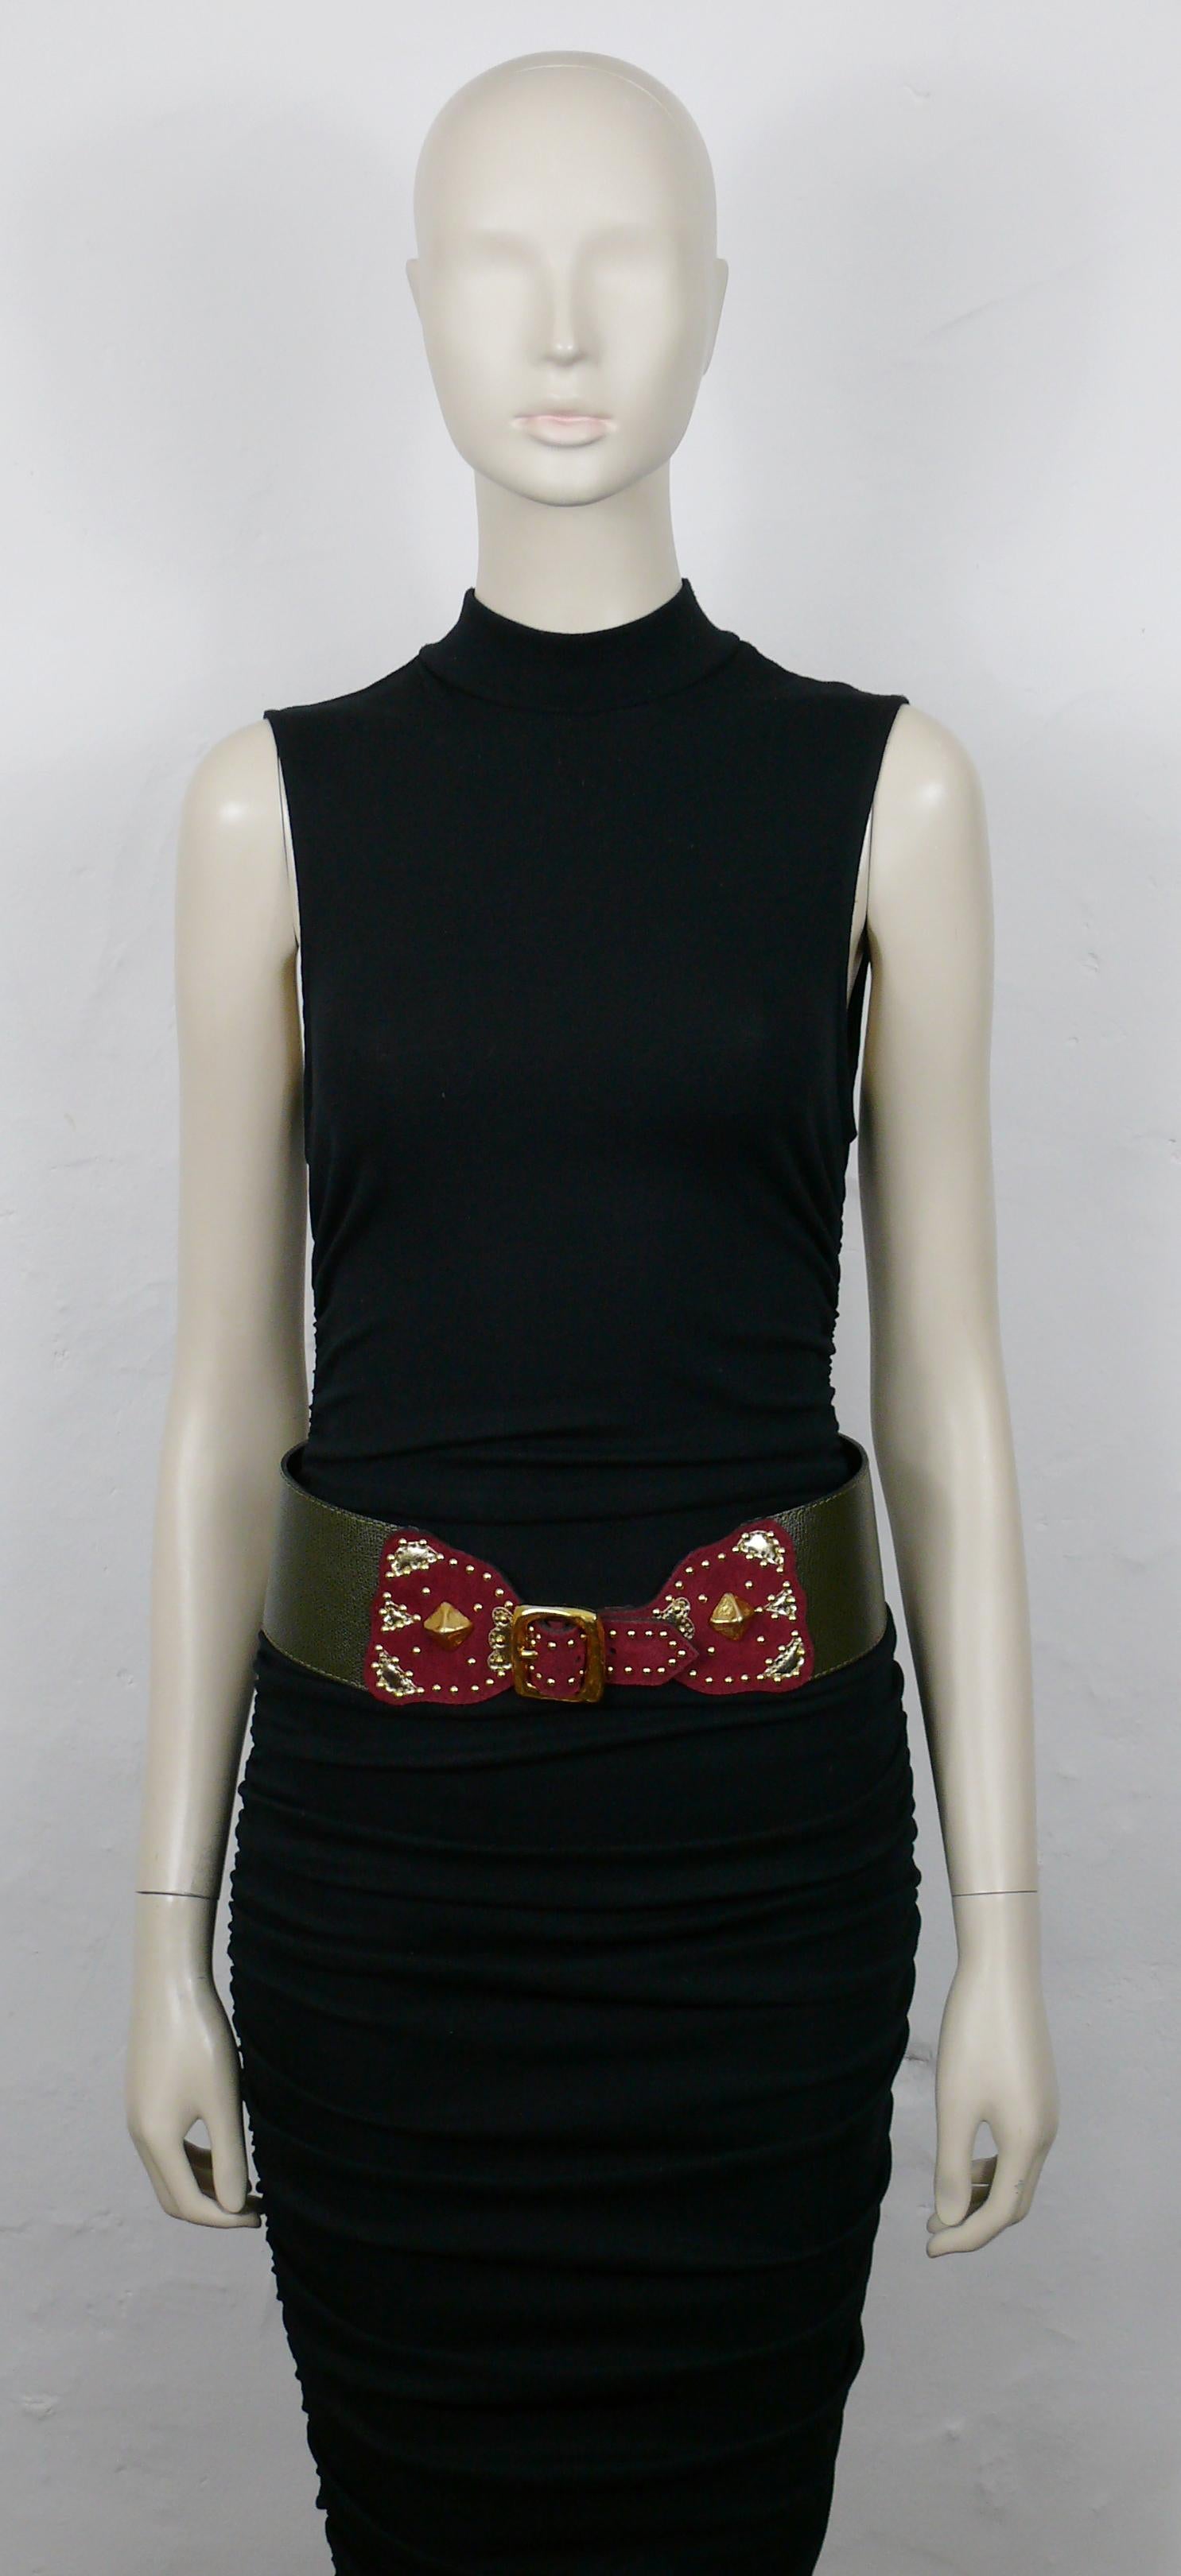 CHRISTIAN LACROIX vintage wide khaki color grained leather belt with burgundy red suede details, gold leather appliques, metal studs, gold resin pyramidal cabochons, textured gold tone metal buckle.

Marked CHRISTIAN LACROIX Paris.
Made in